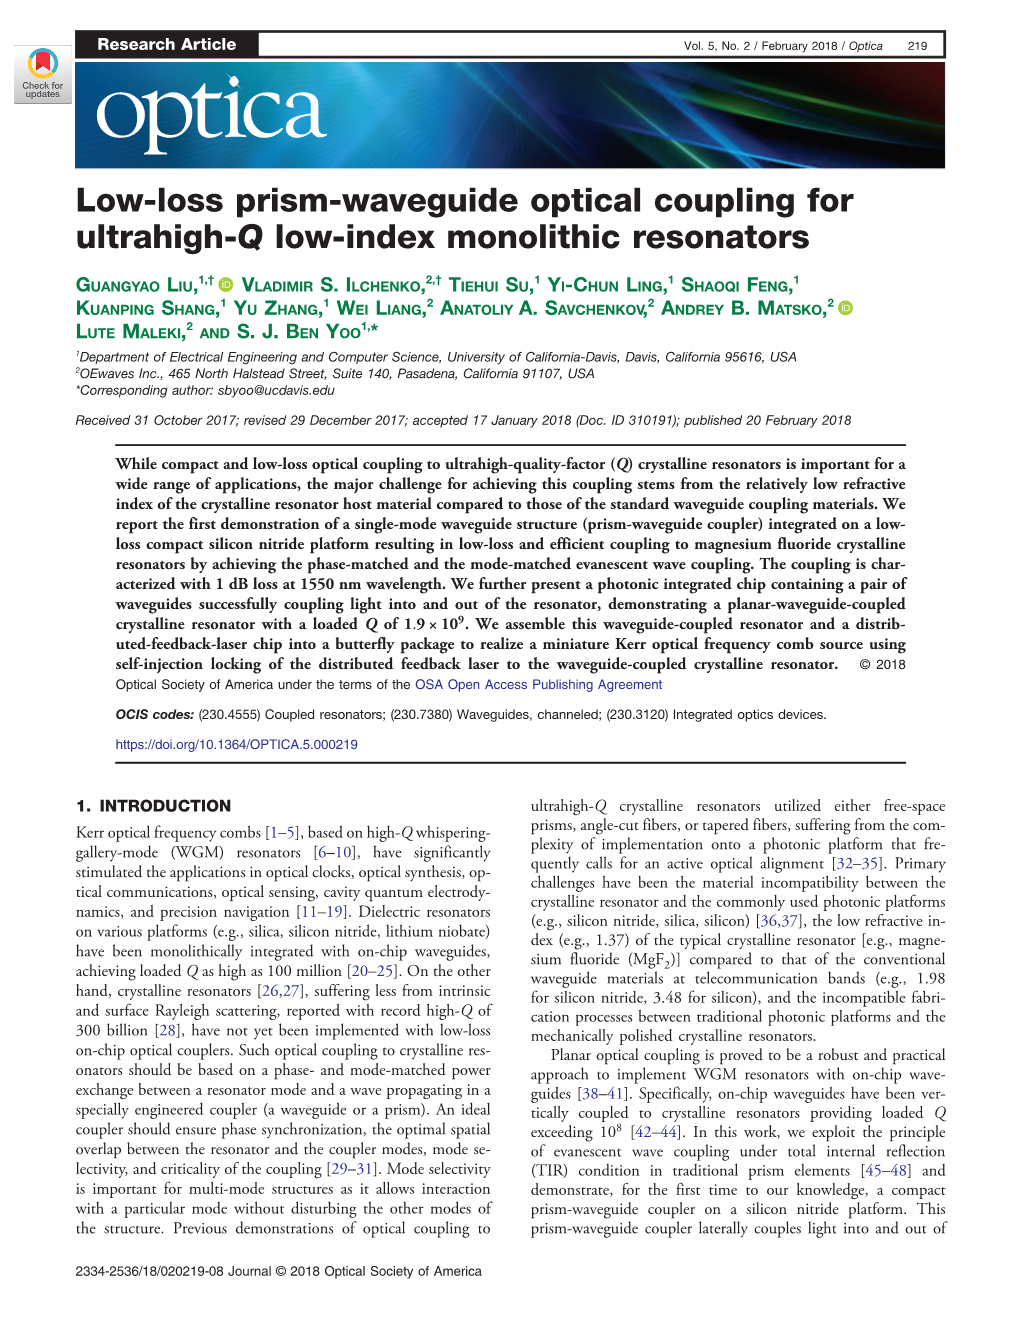 Low-Loss Prism-Waveguide Optical Coupling for Ultrahigh-Q Low-Index Monolithic Resonators